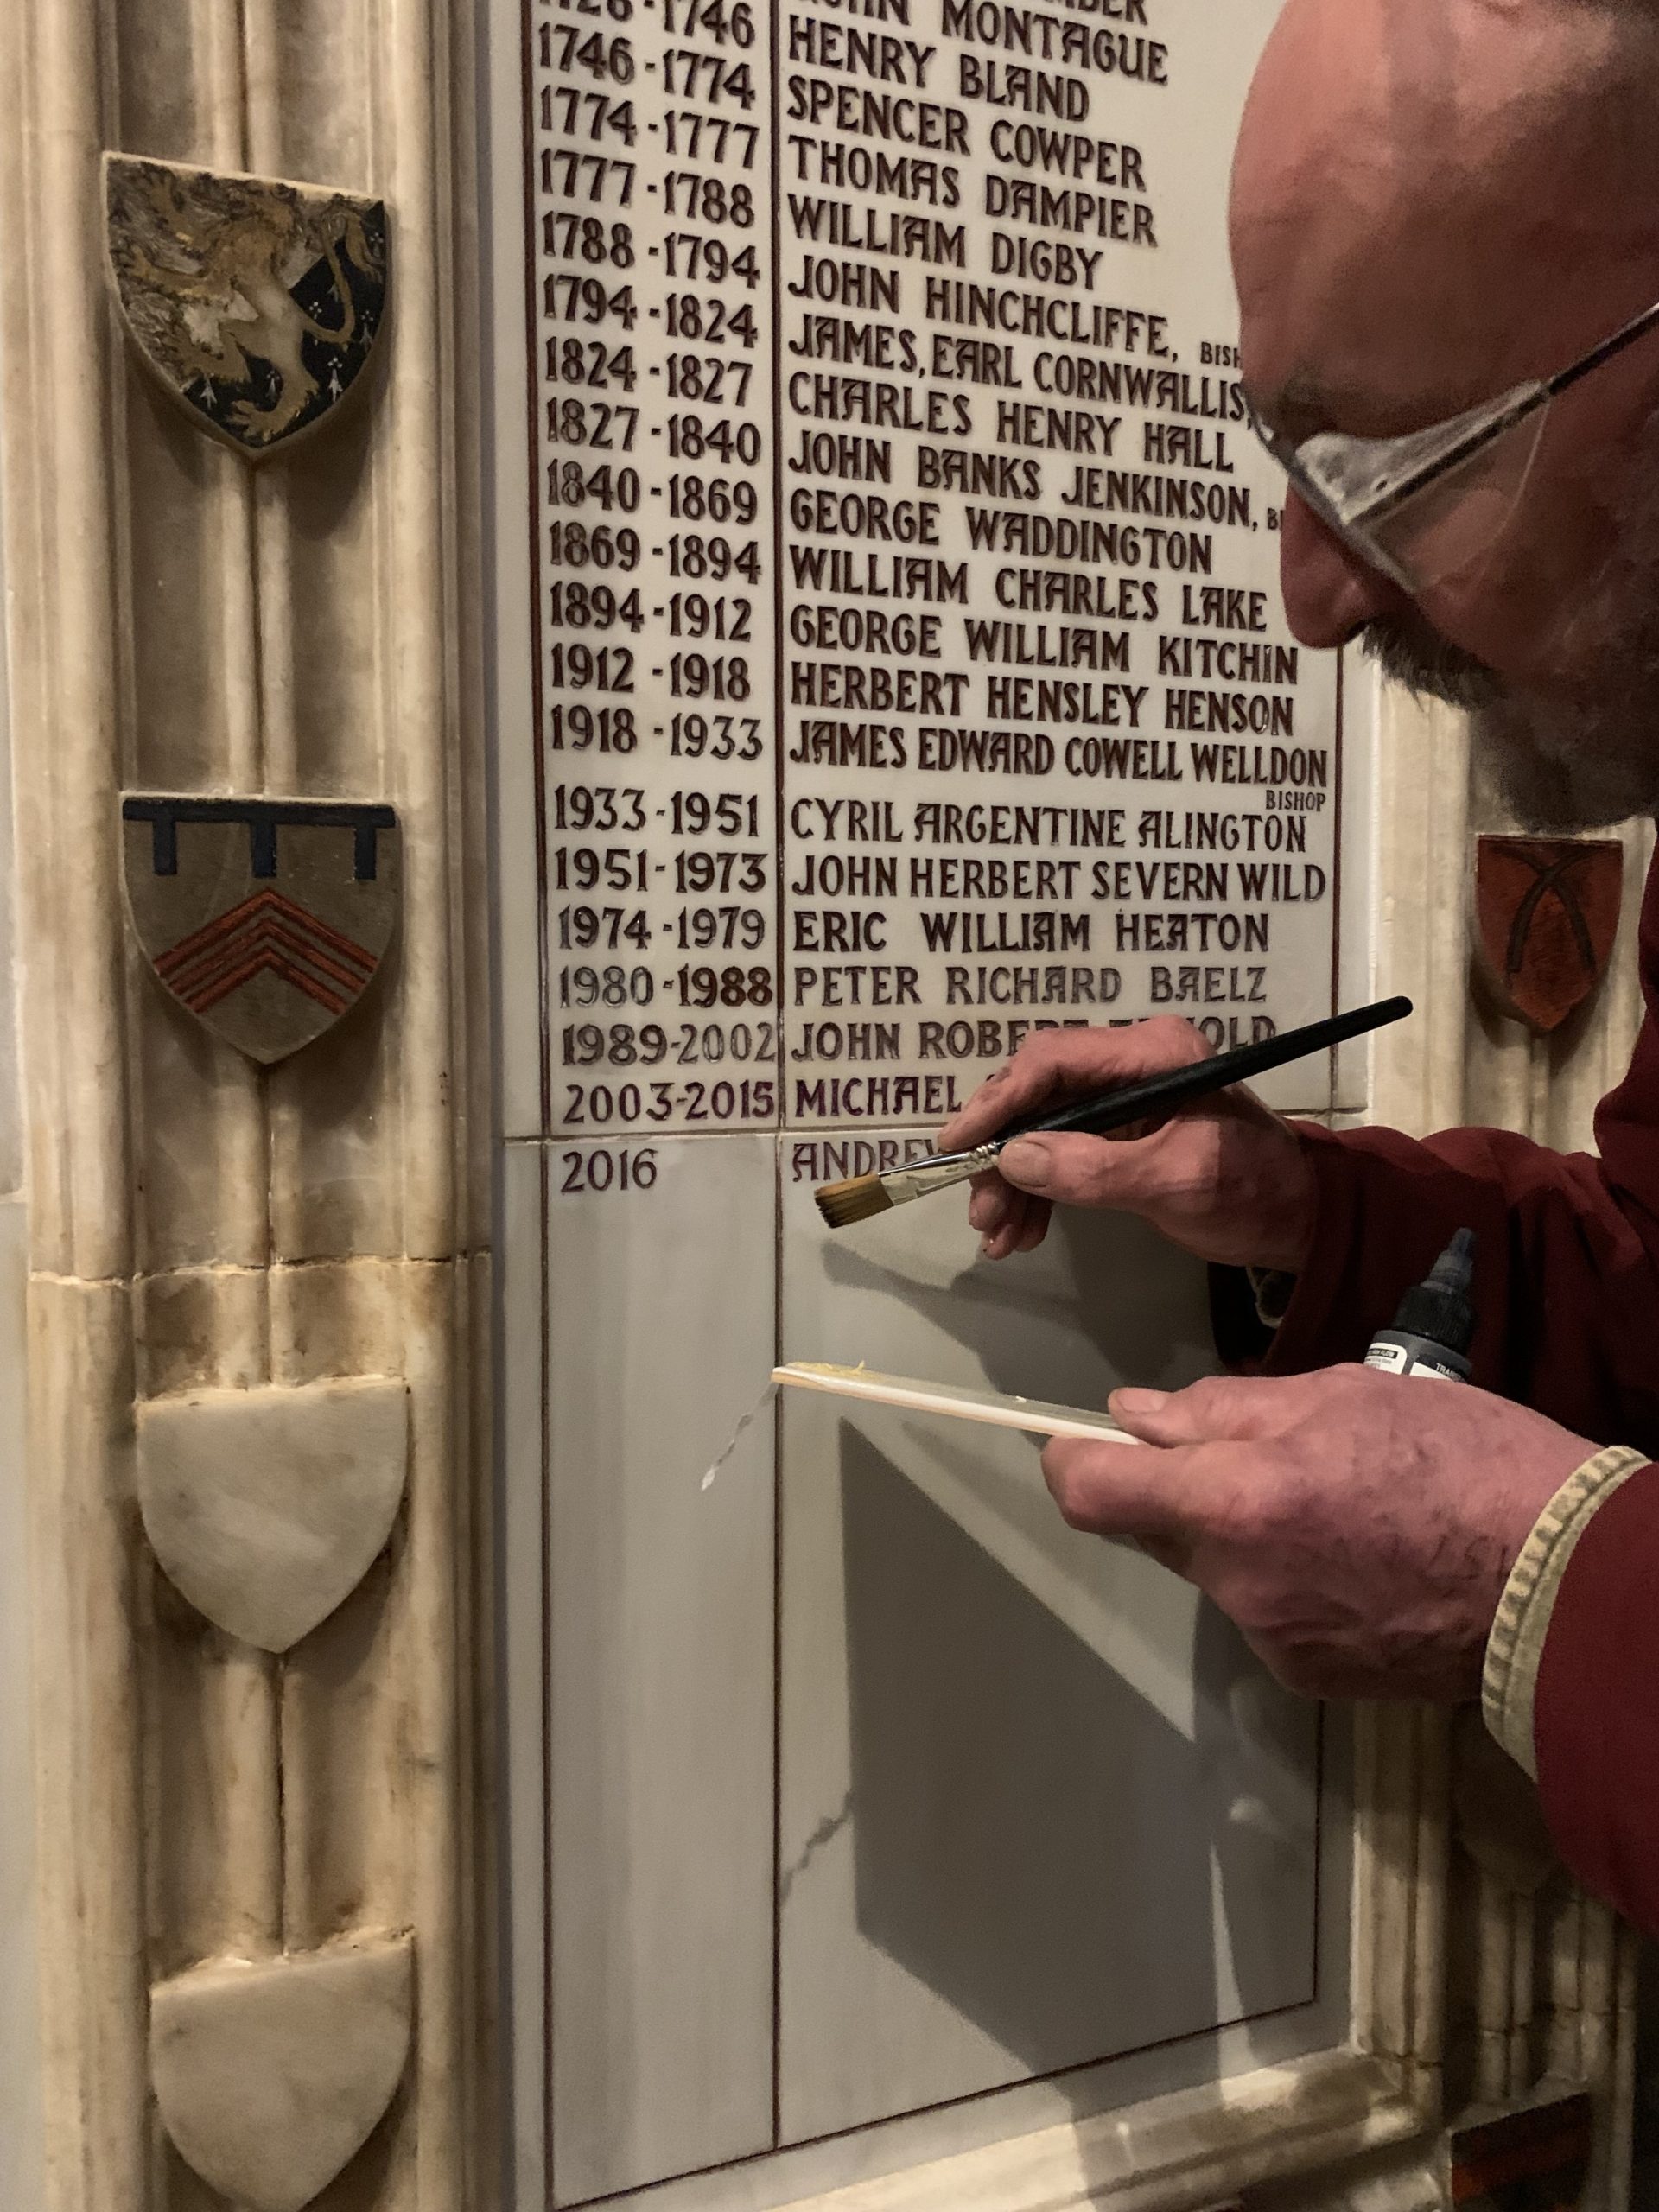 Dean of Durham's Name Finally Carved in Stone as Historic, Cathedral Plaque Gets an Extension 